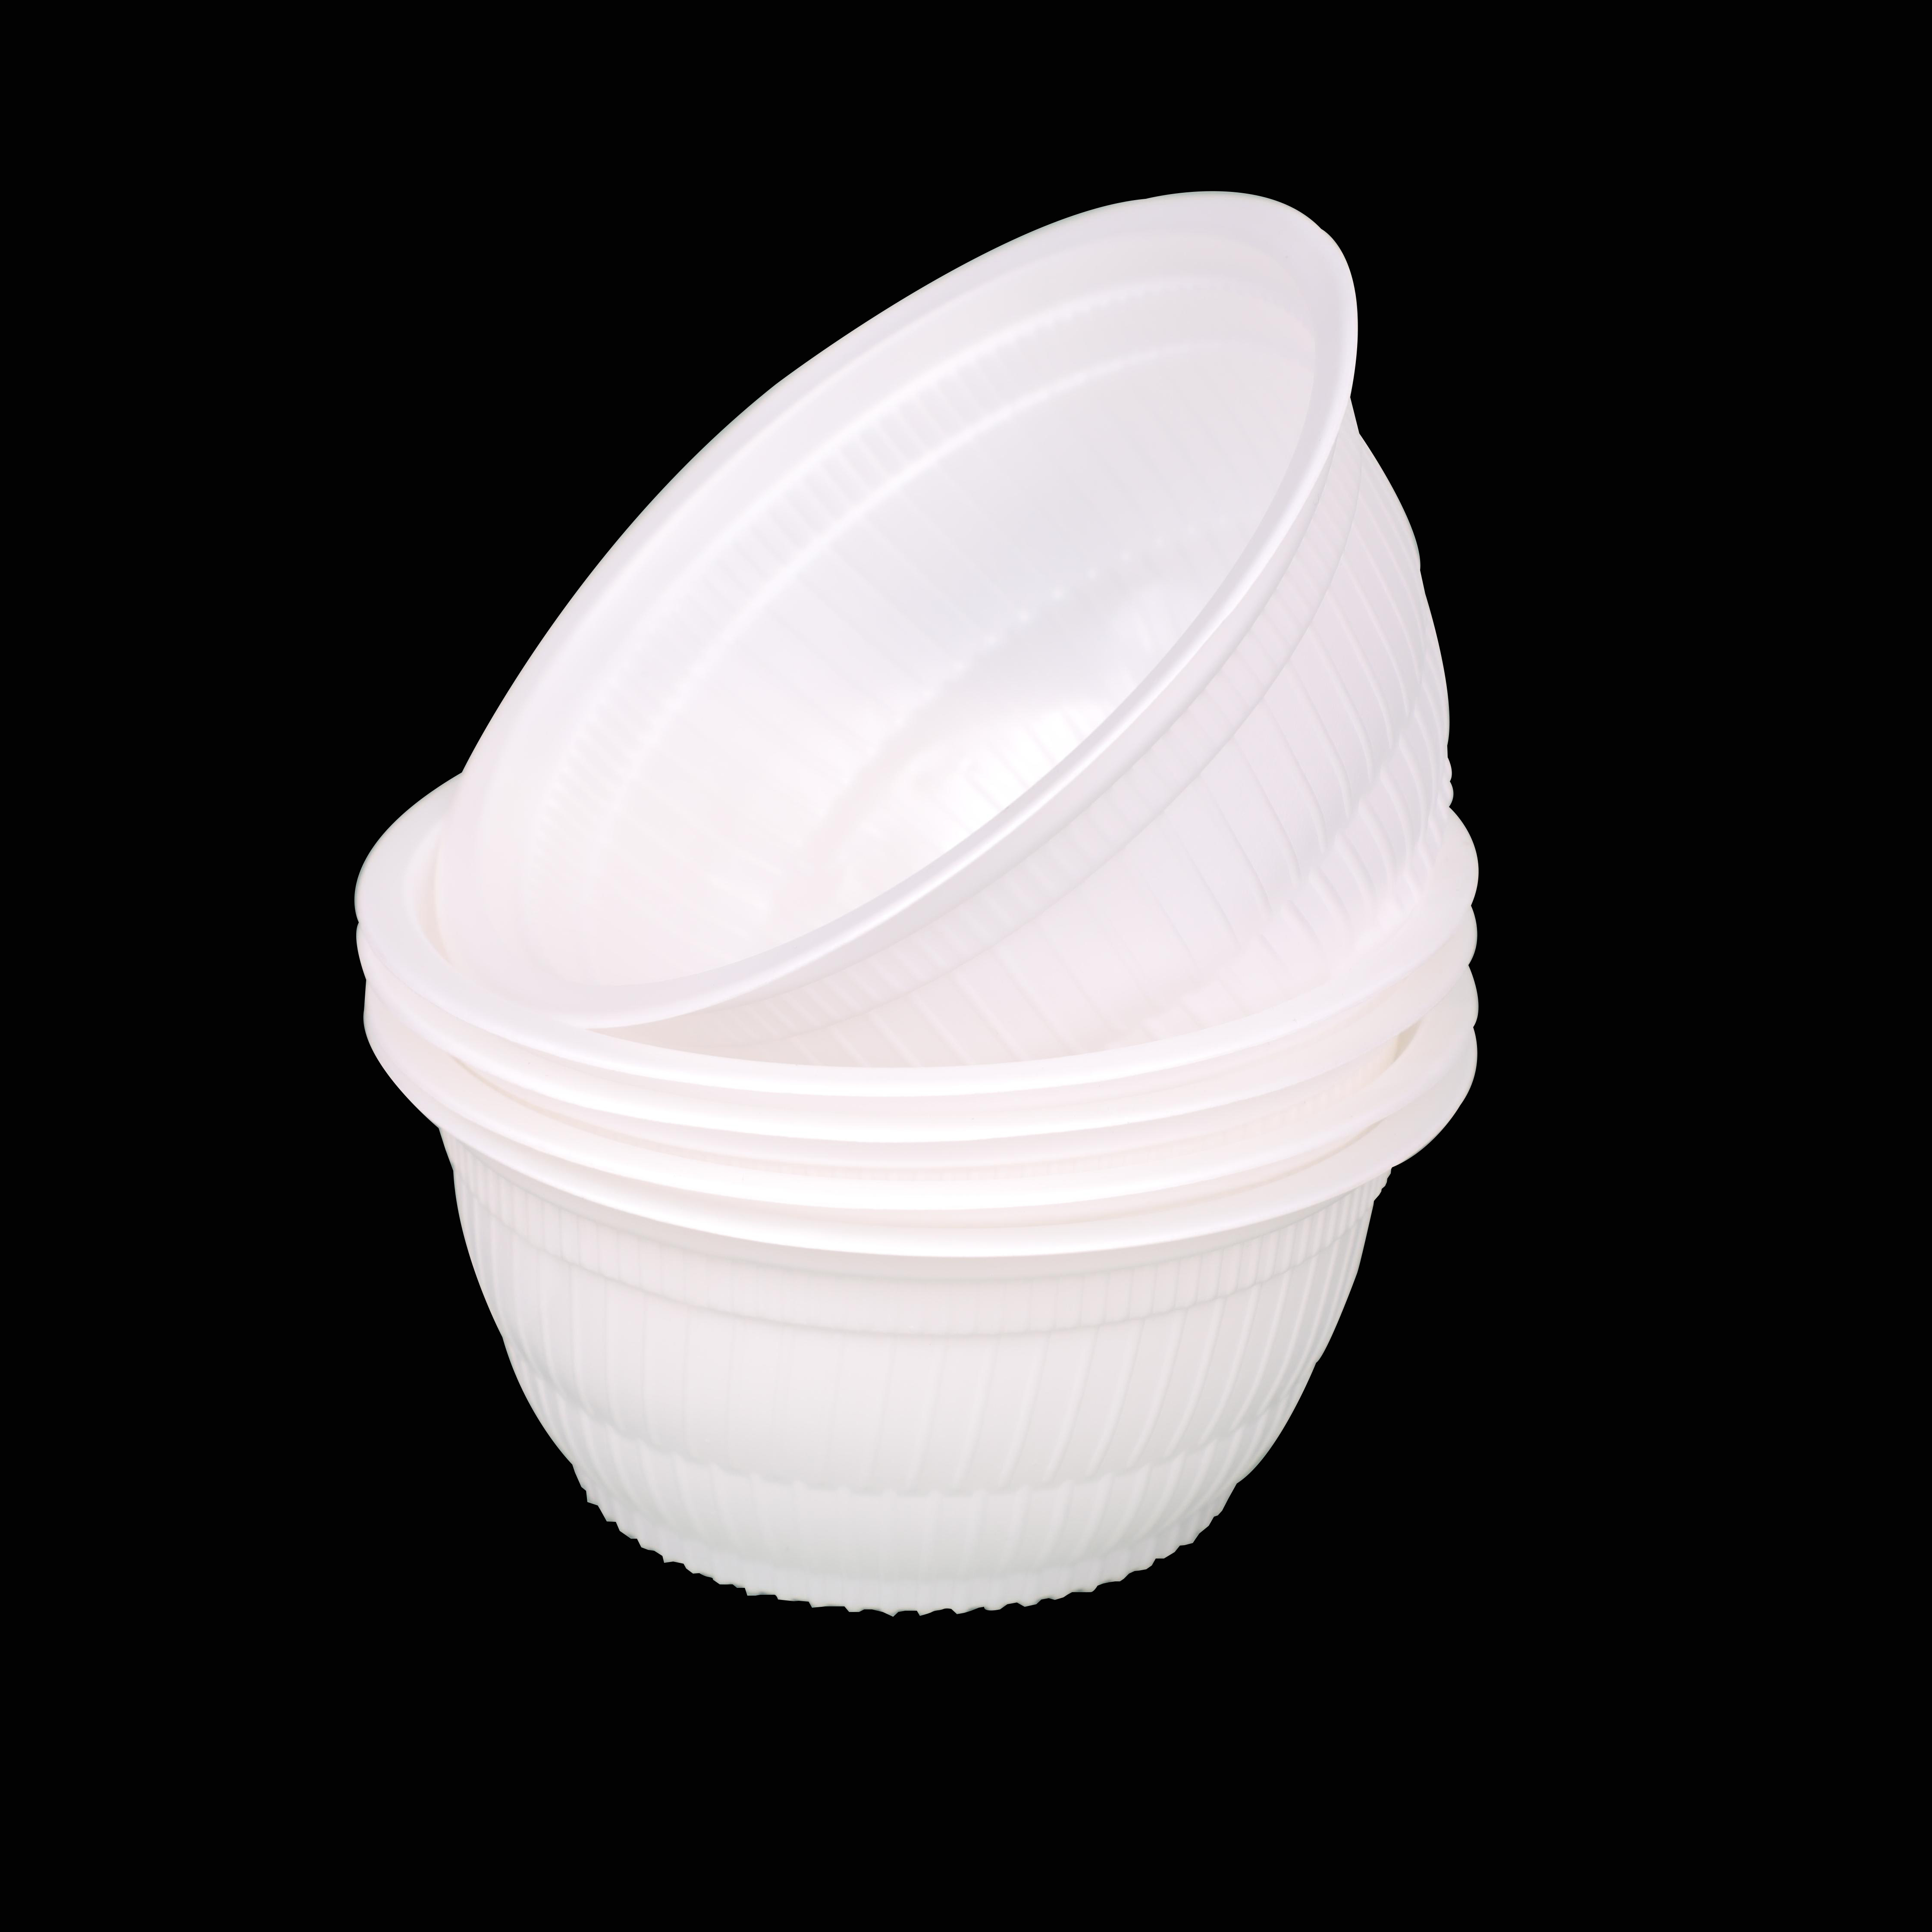 Recyclable Biodegrade PLA Bowl Cup Saucer Spoons-wallis